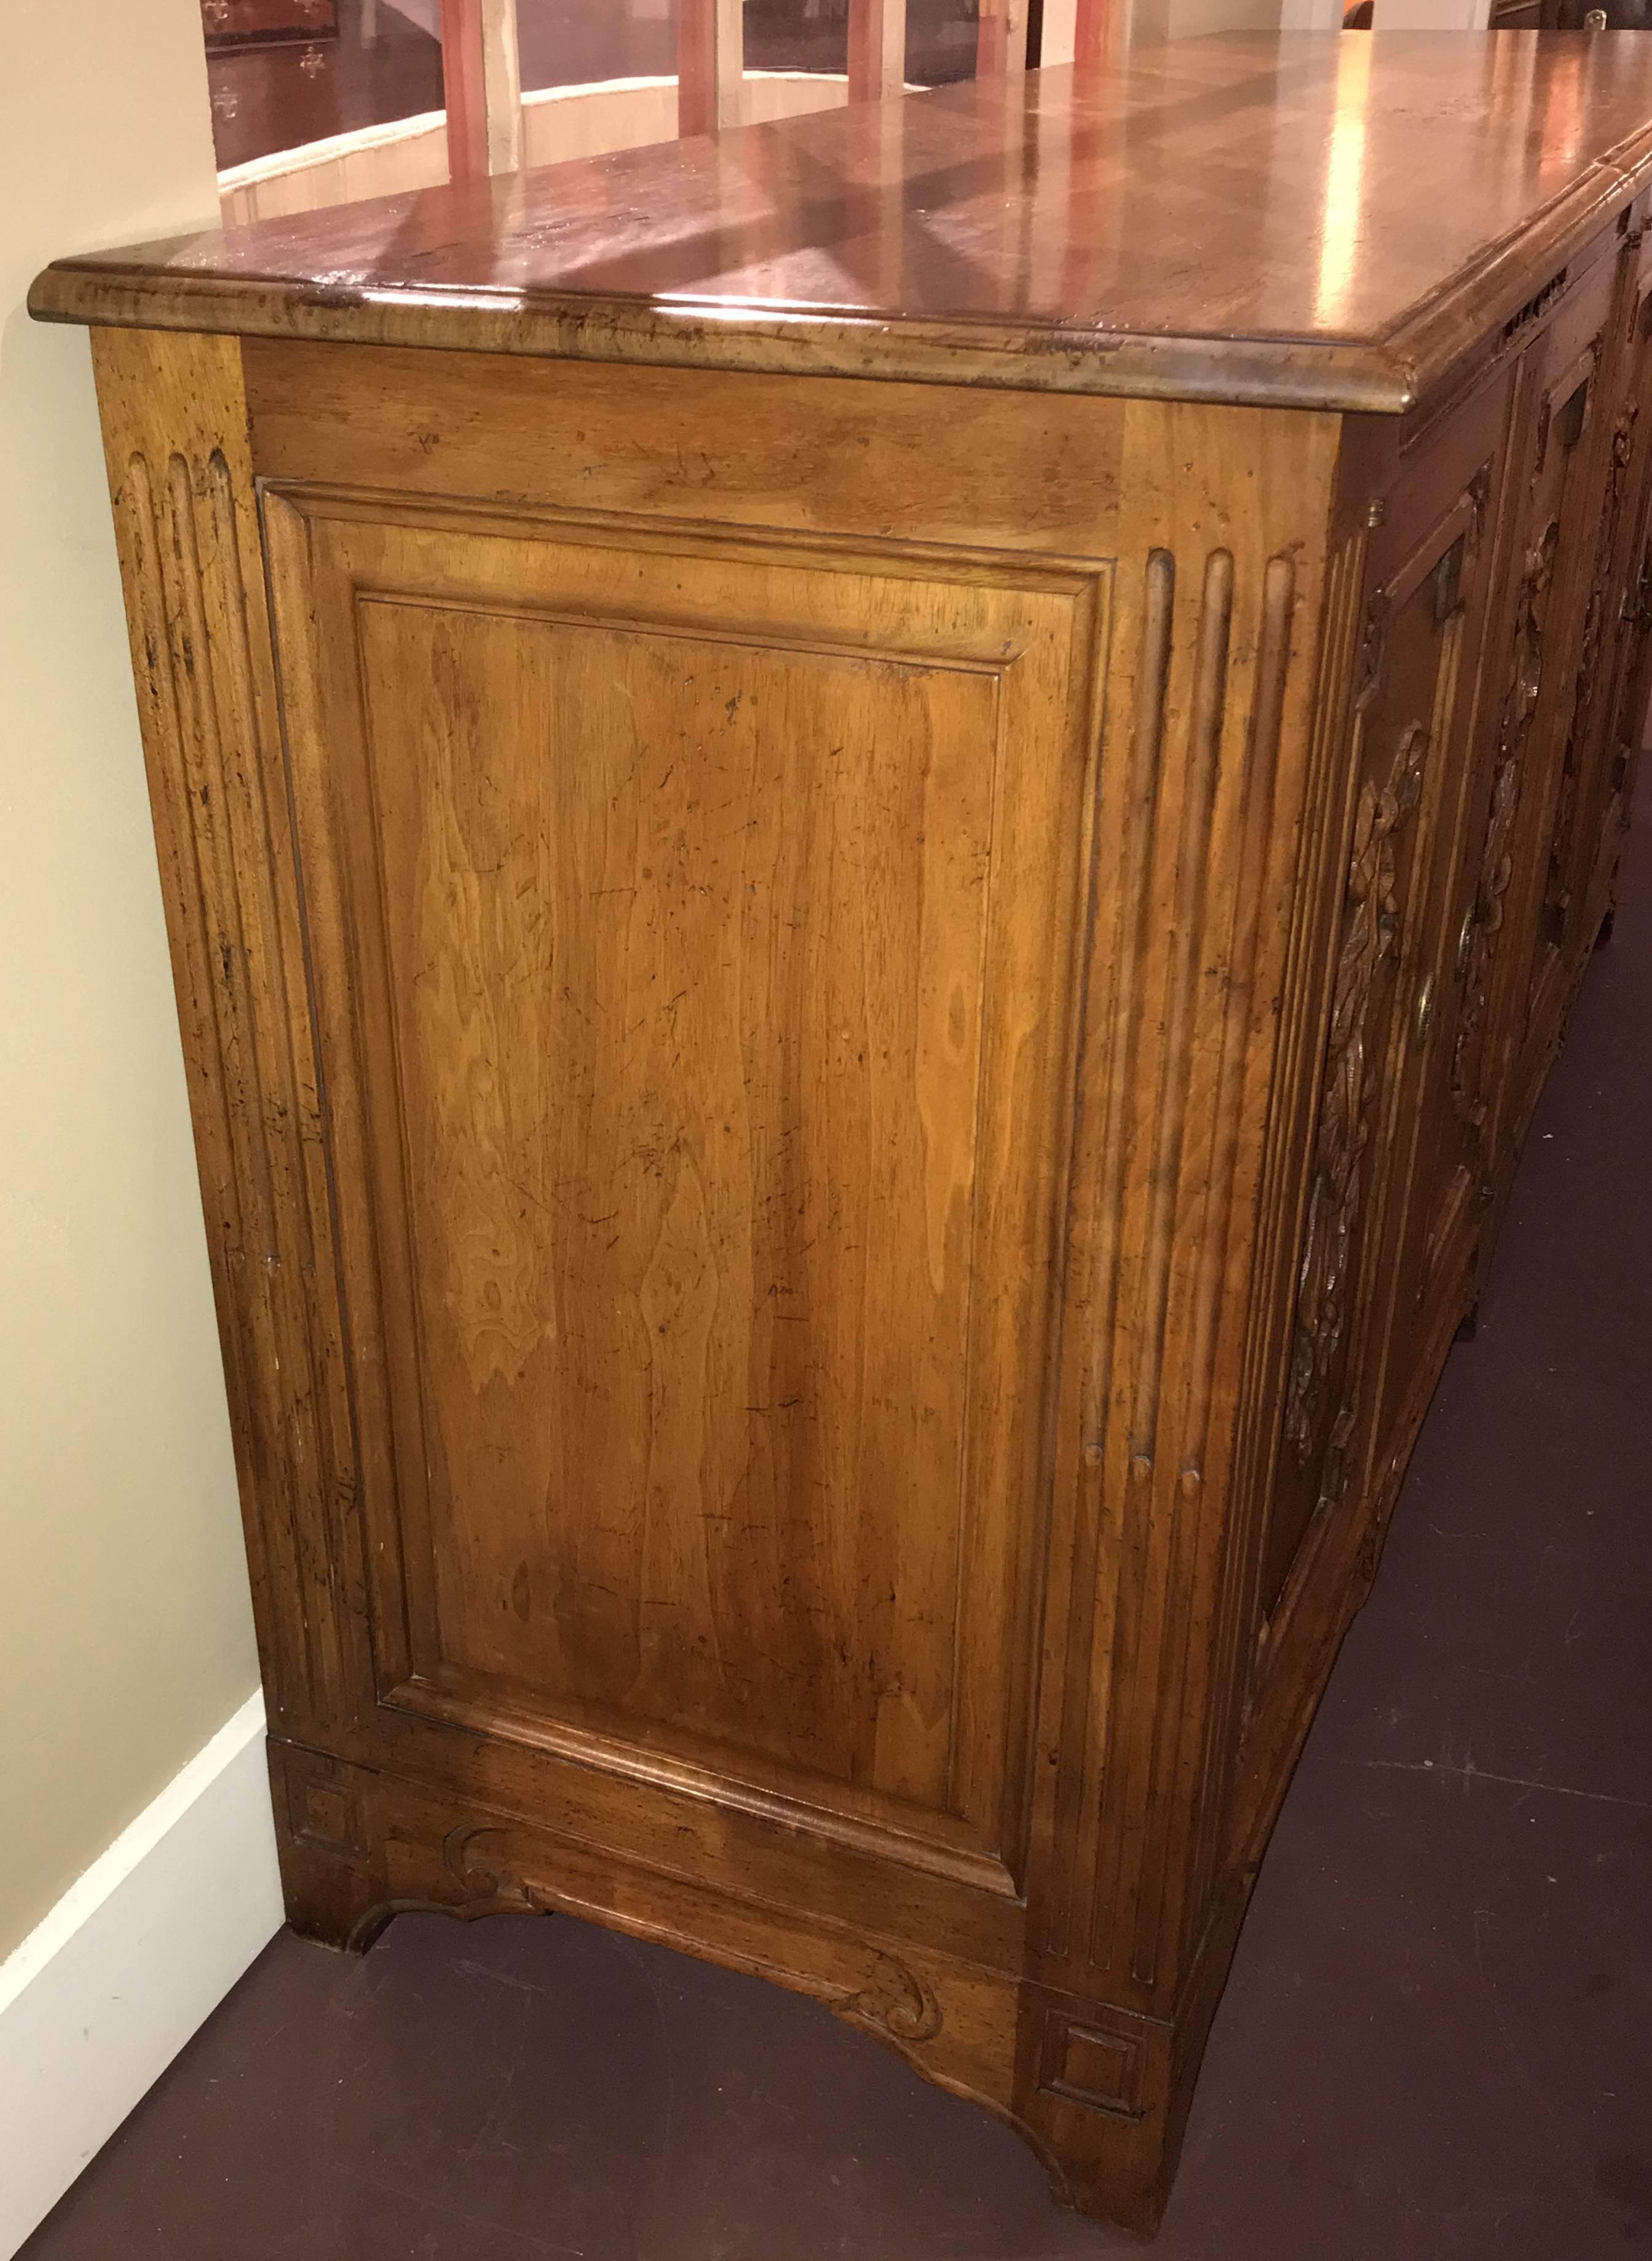 20th Century French Style Fruitwood Credenza or Server Sideboard with Ribbon Carved Doors